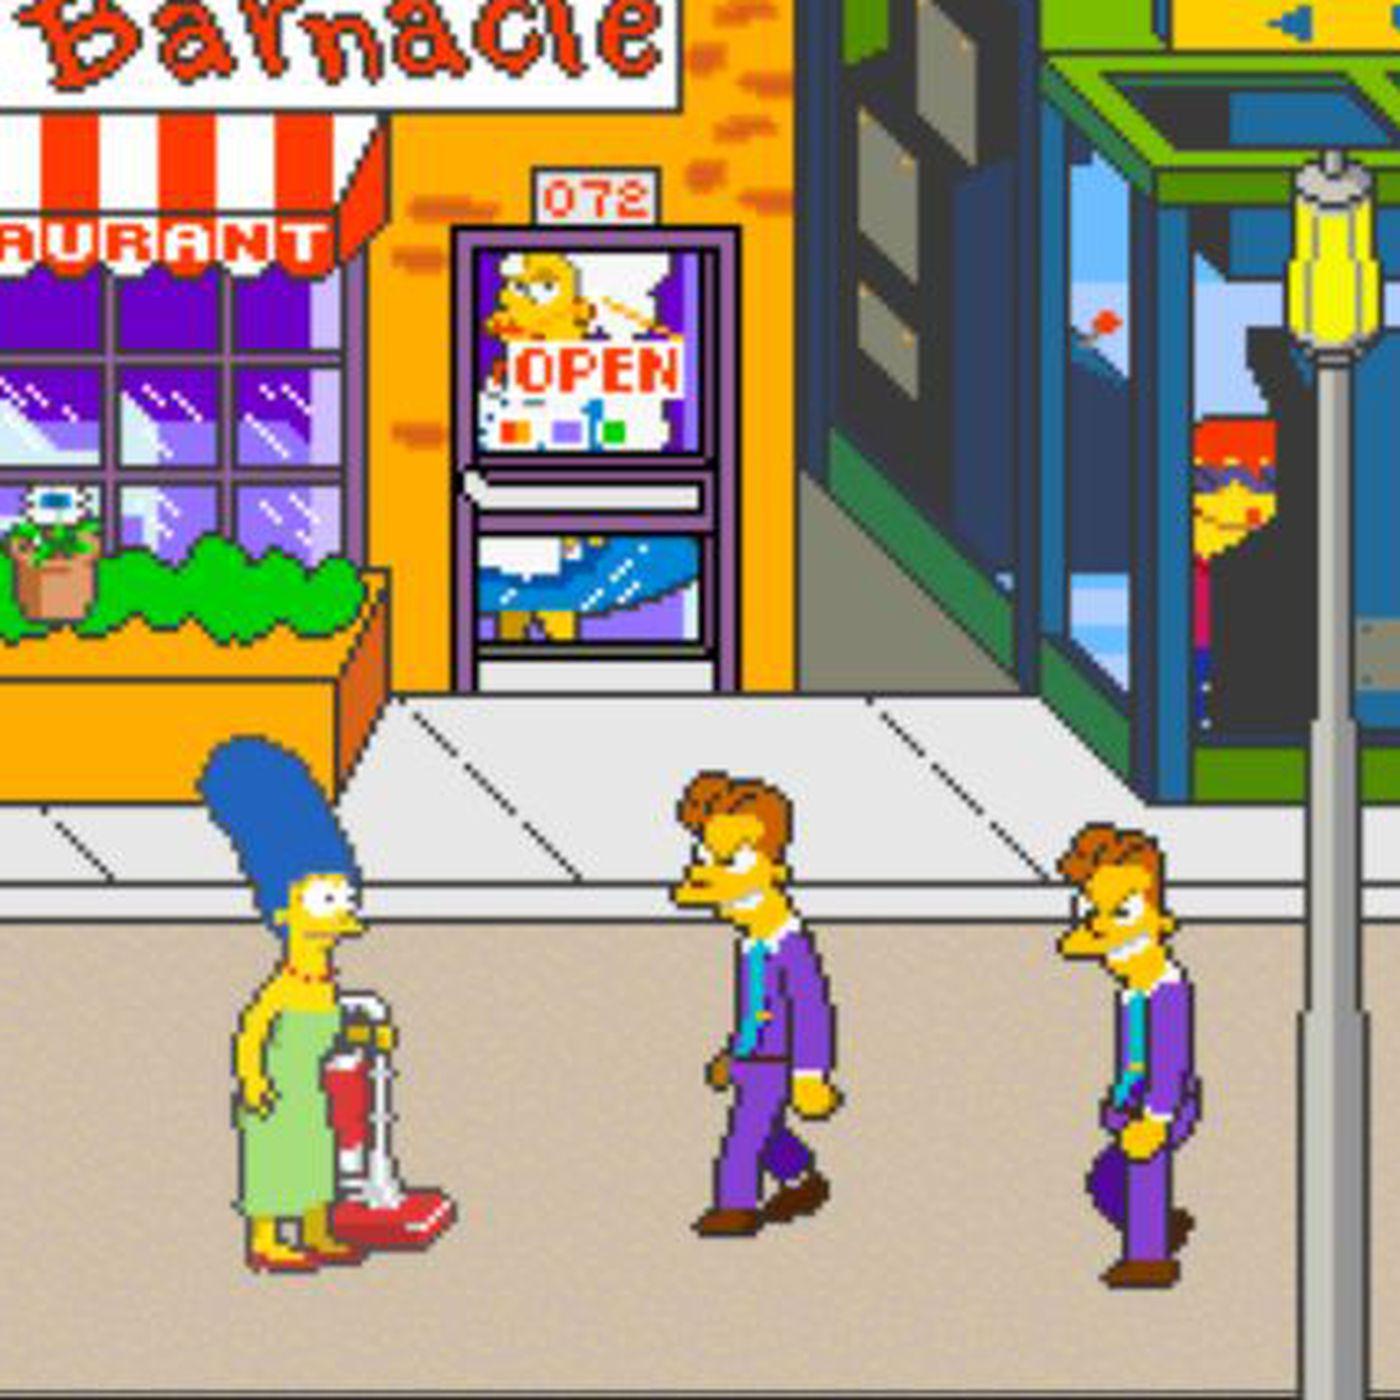 The Simpsons Arcade Game' was the best game ever based on a